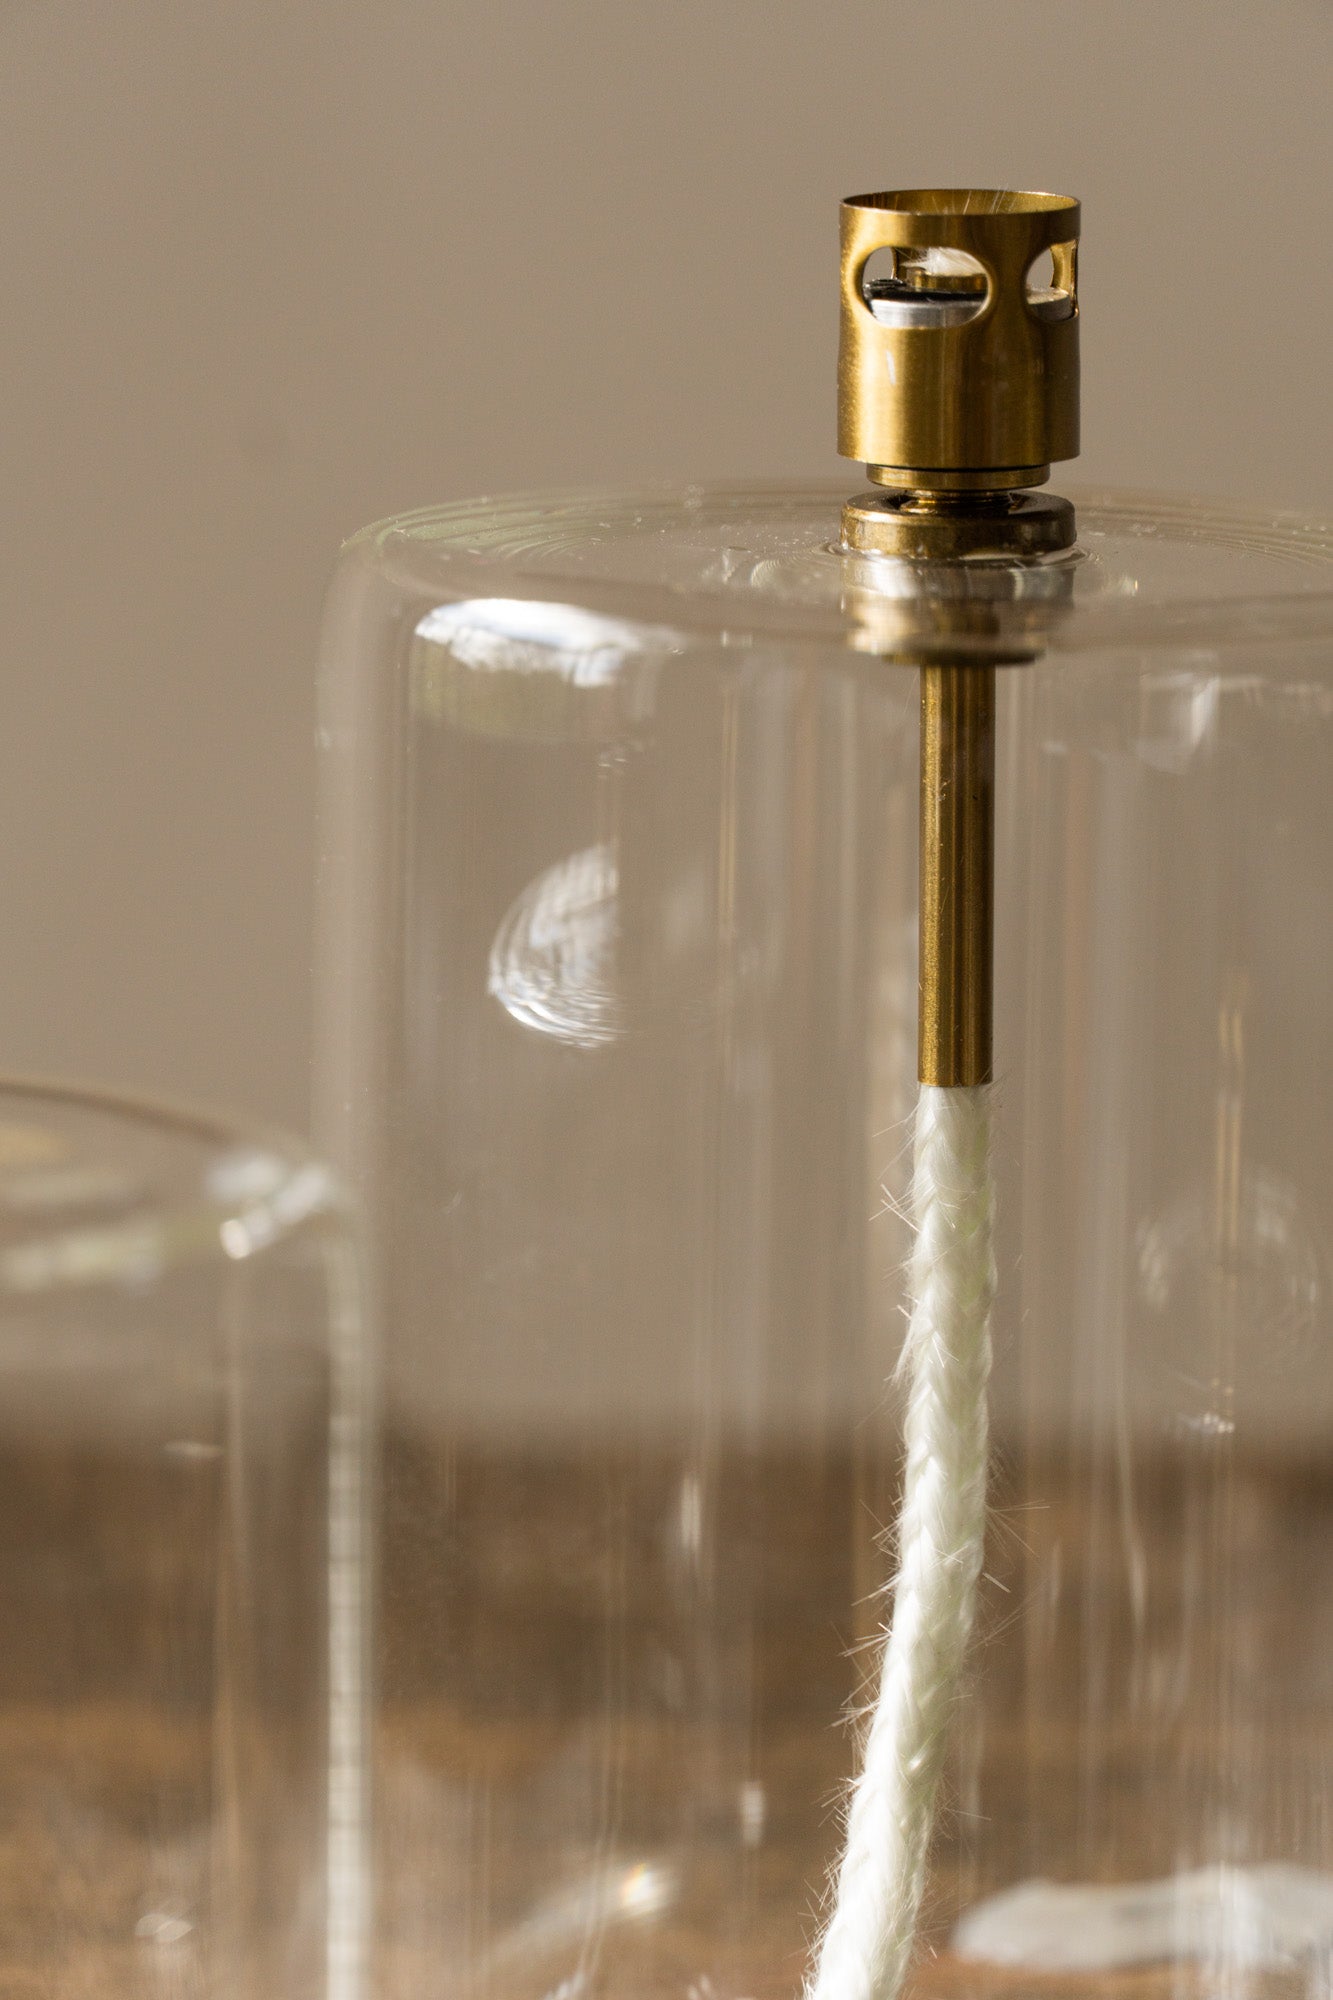 Details of the Cyl Oil Lamp by The Loft Selects.